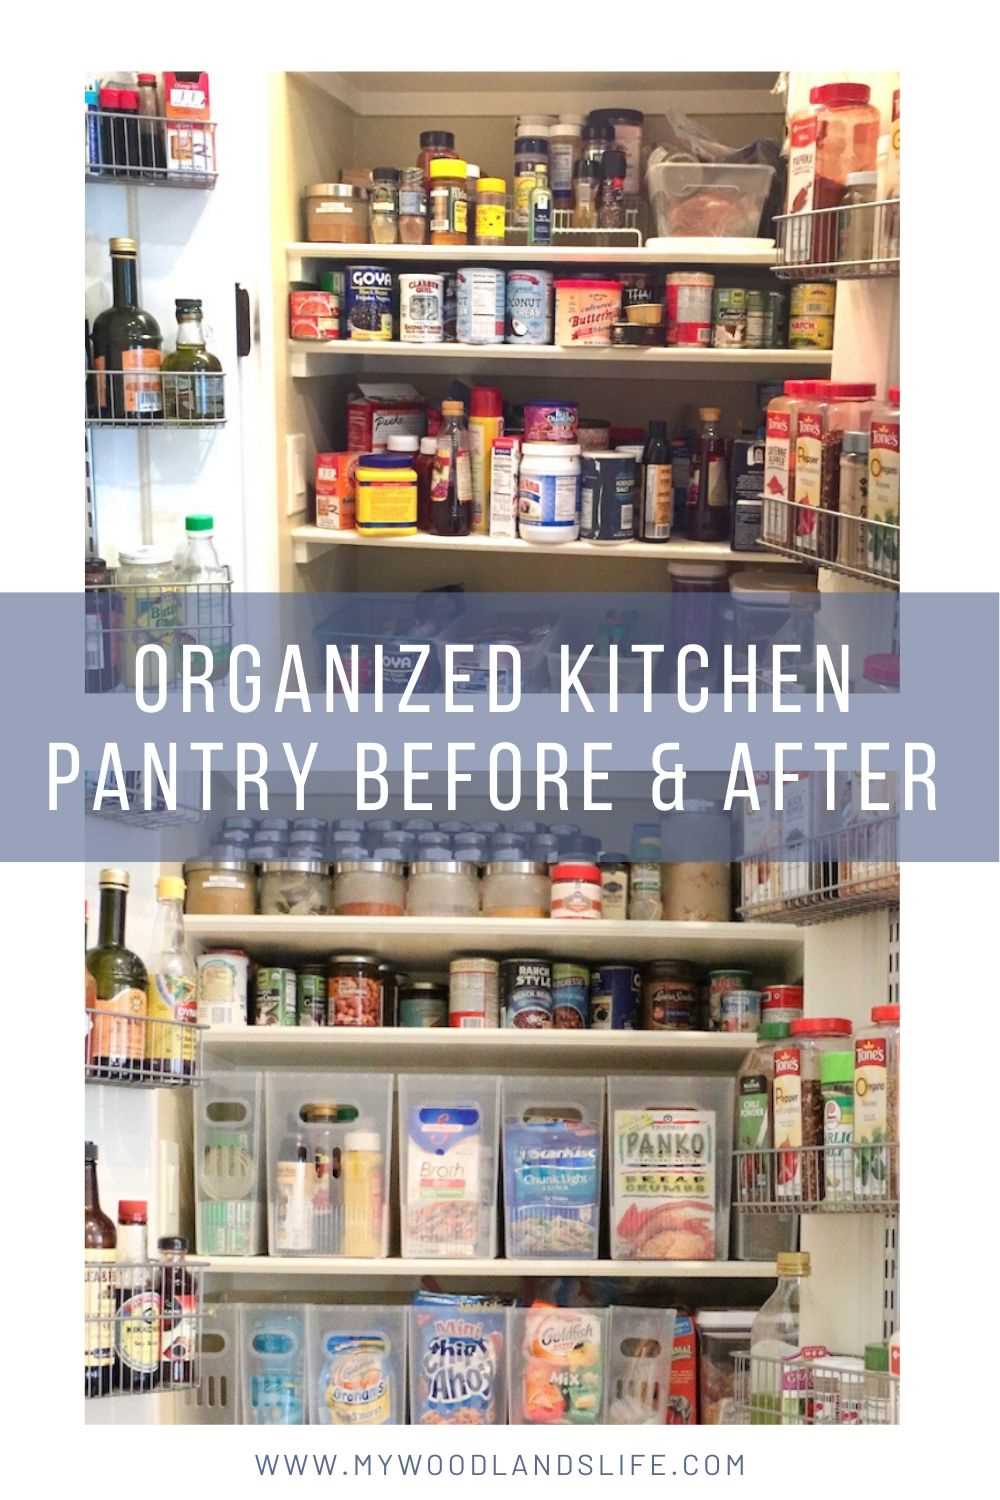 How to organize your pantry before and after